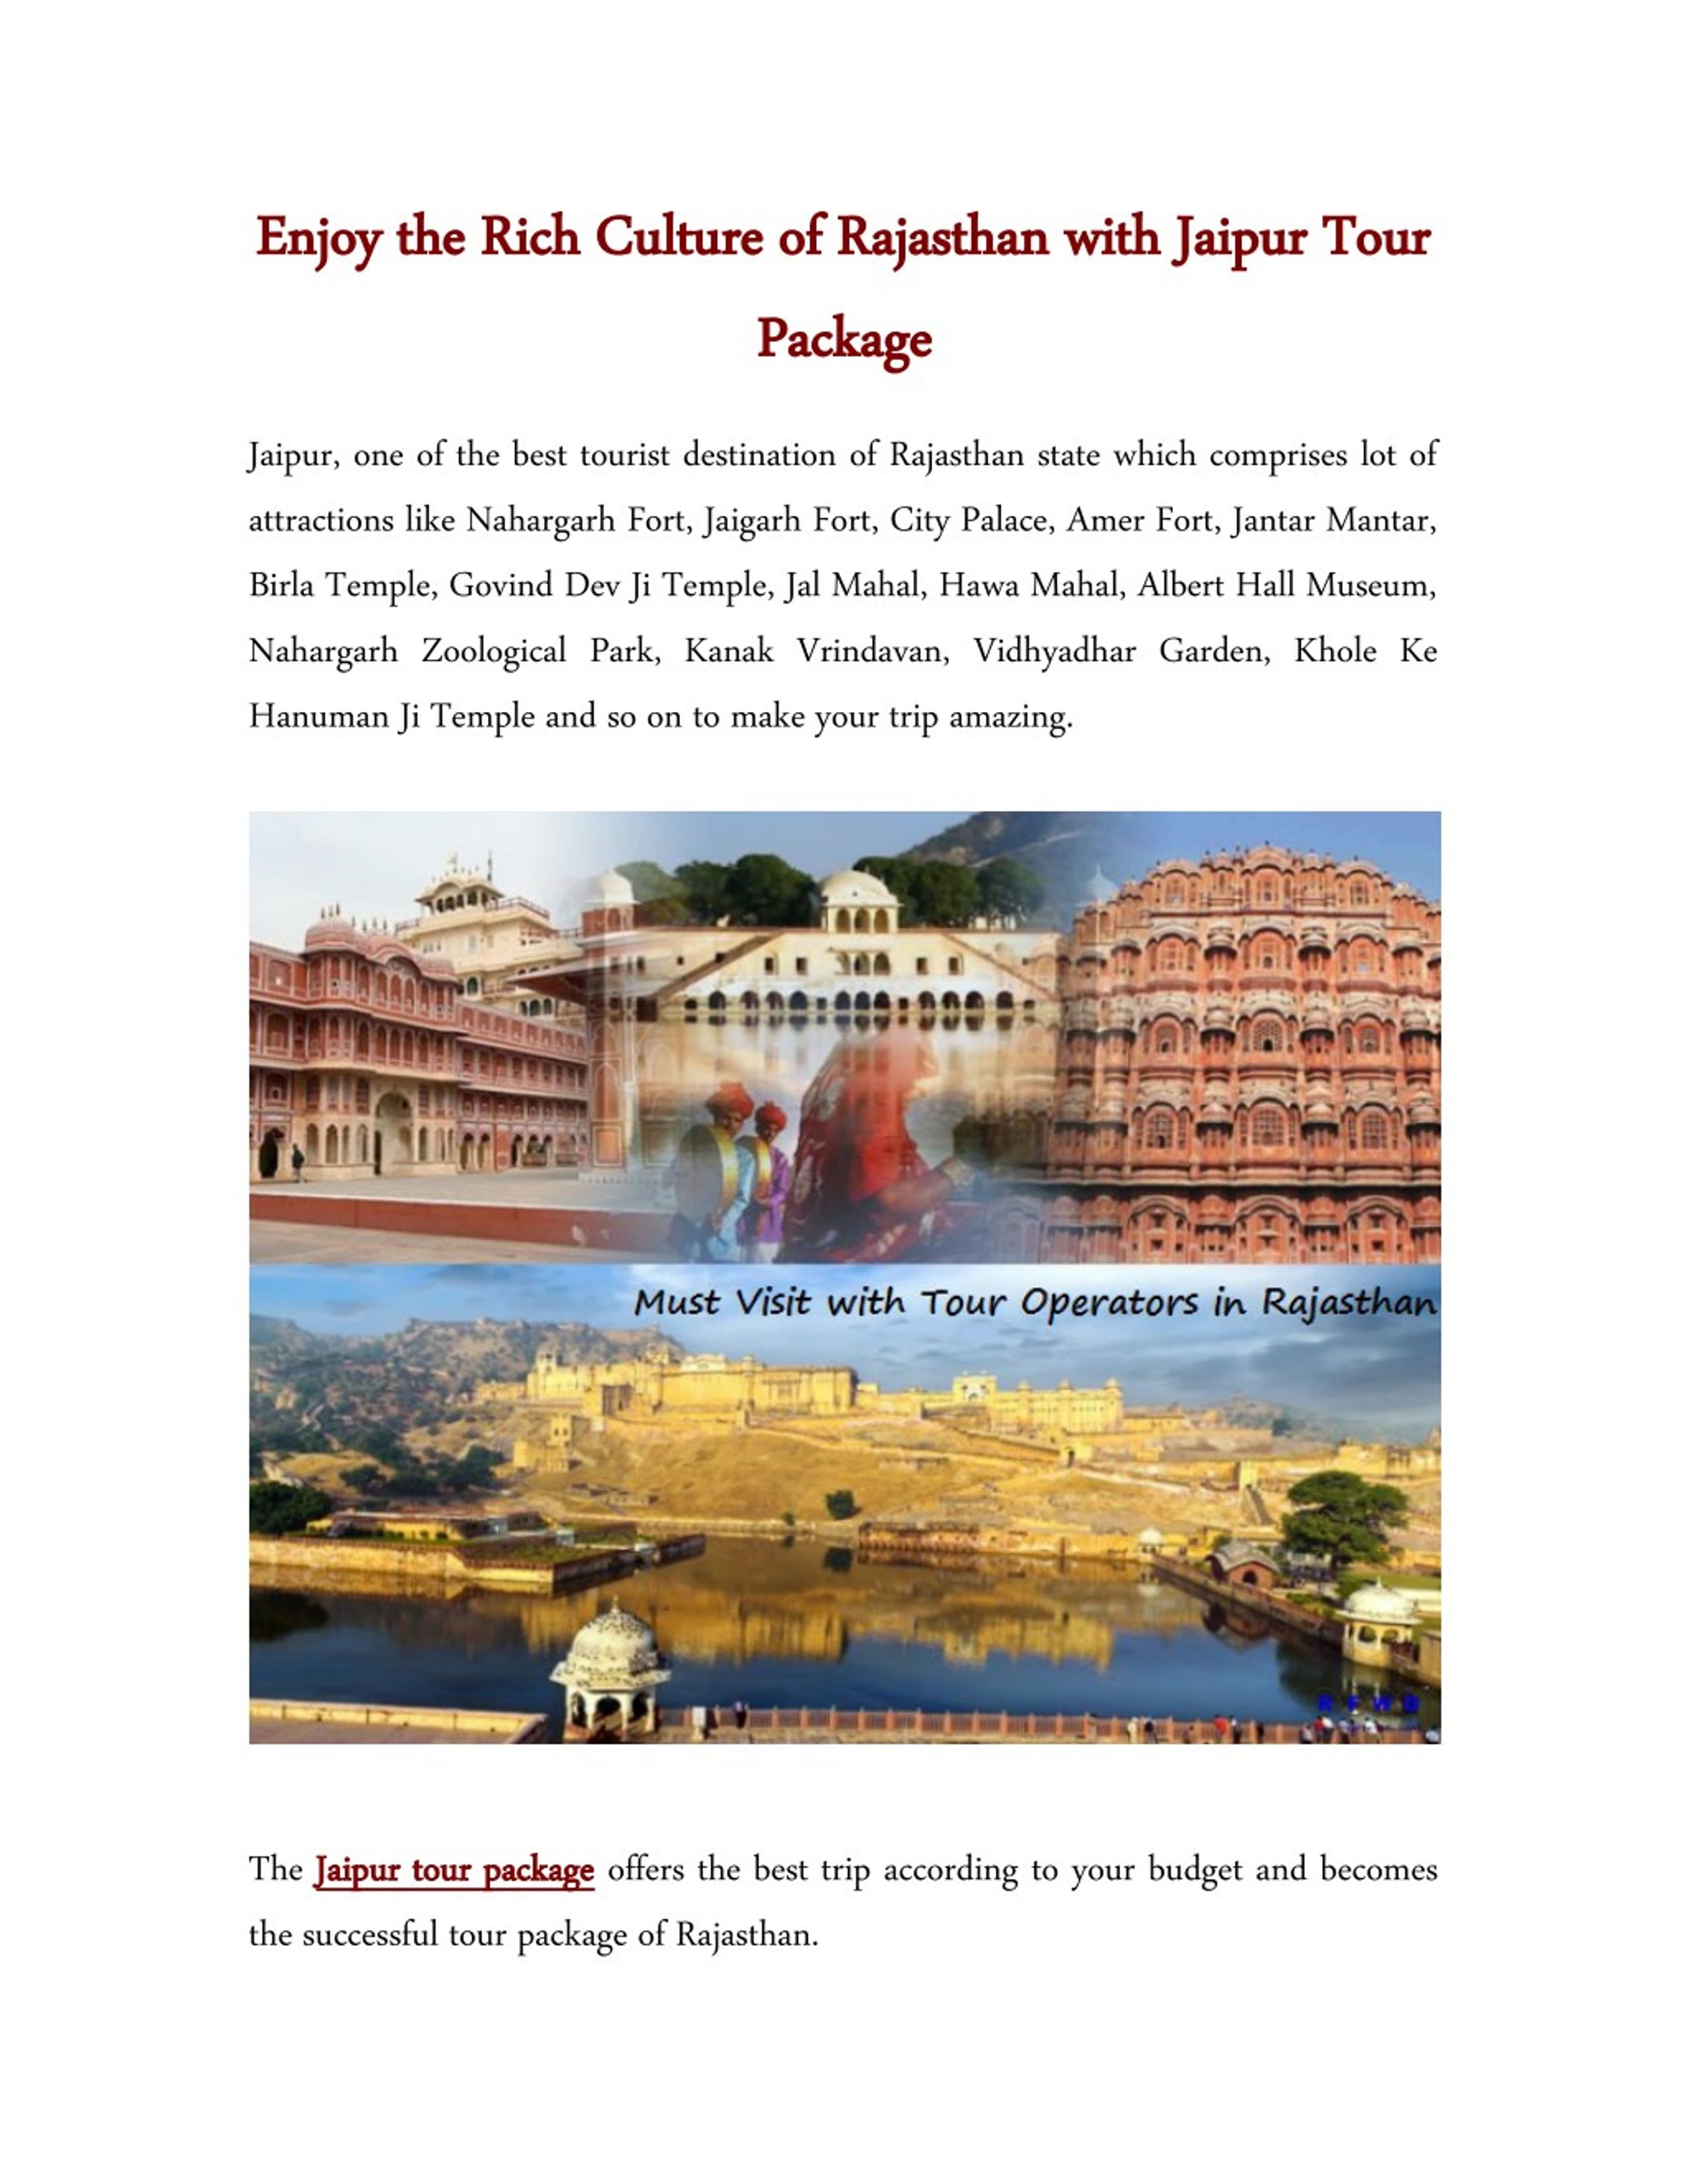 PPT - Enjoy the Rich Culture of Rajasthan with Jaipur Tour Package ...